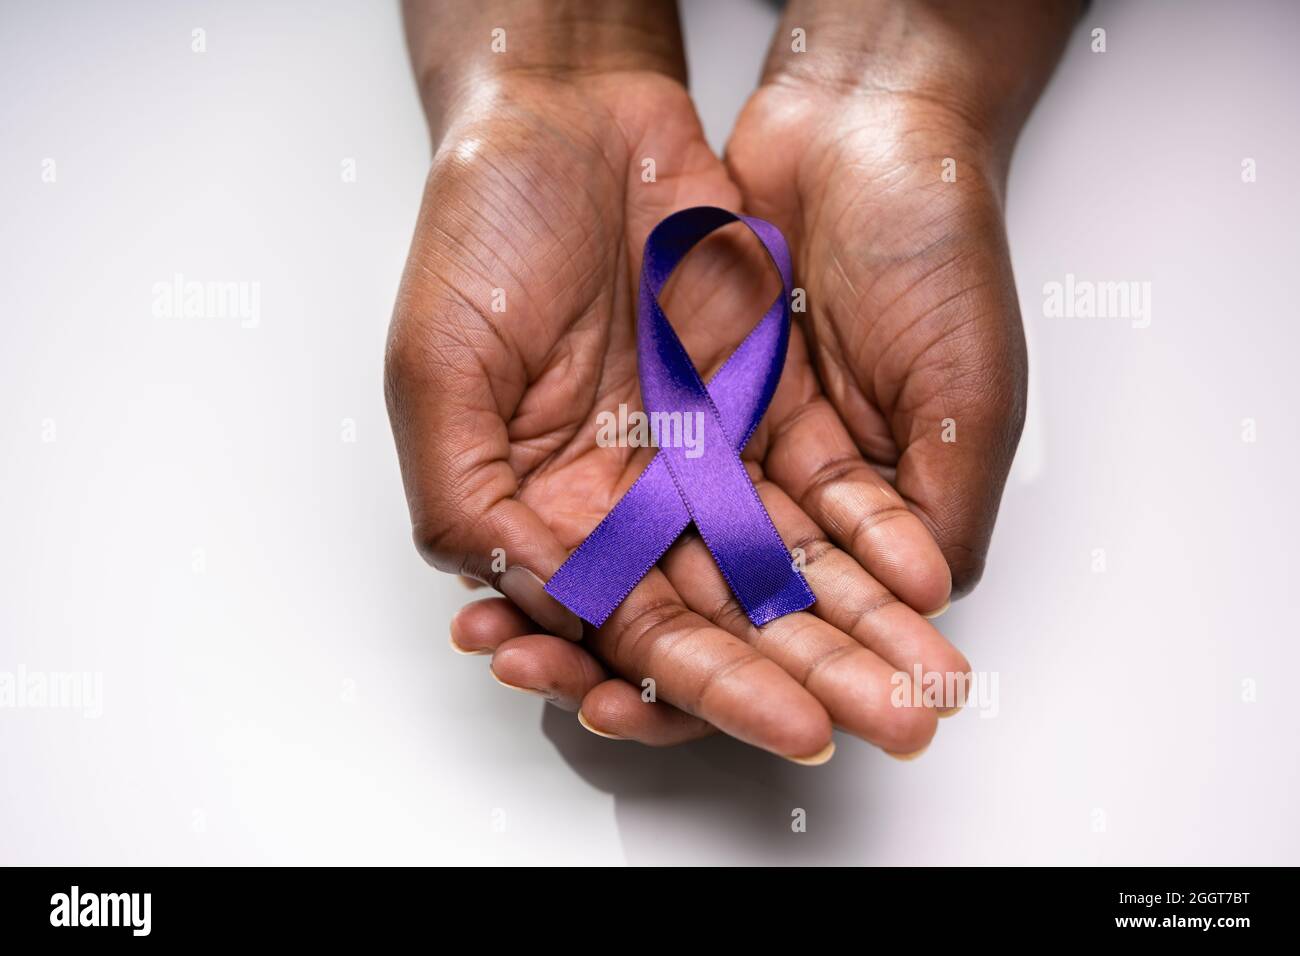 Human Hand Showing Violet Ribbon To Support Pancreatic Cancer Awareness Stock Photo